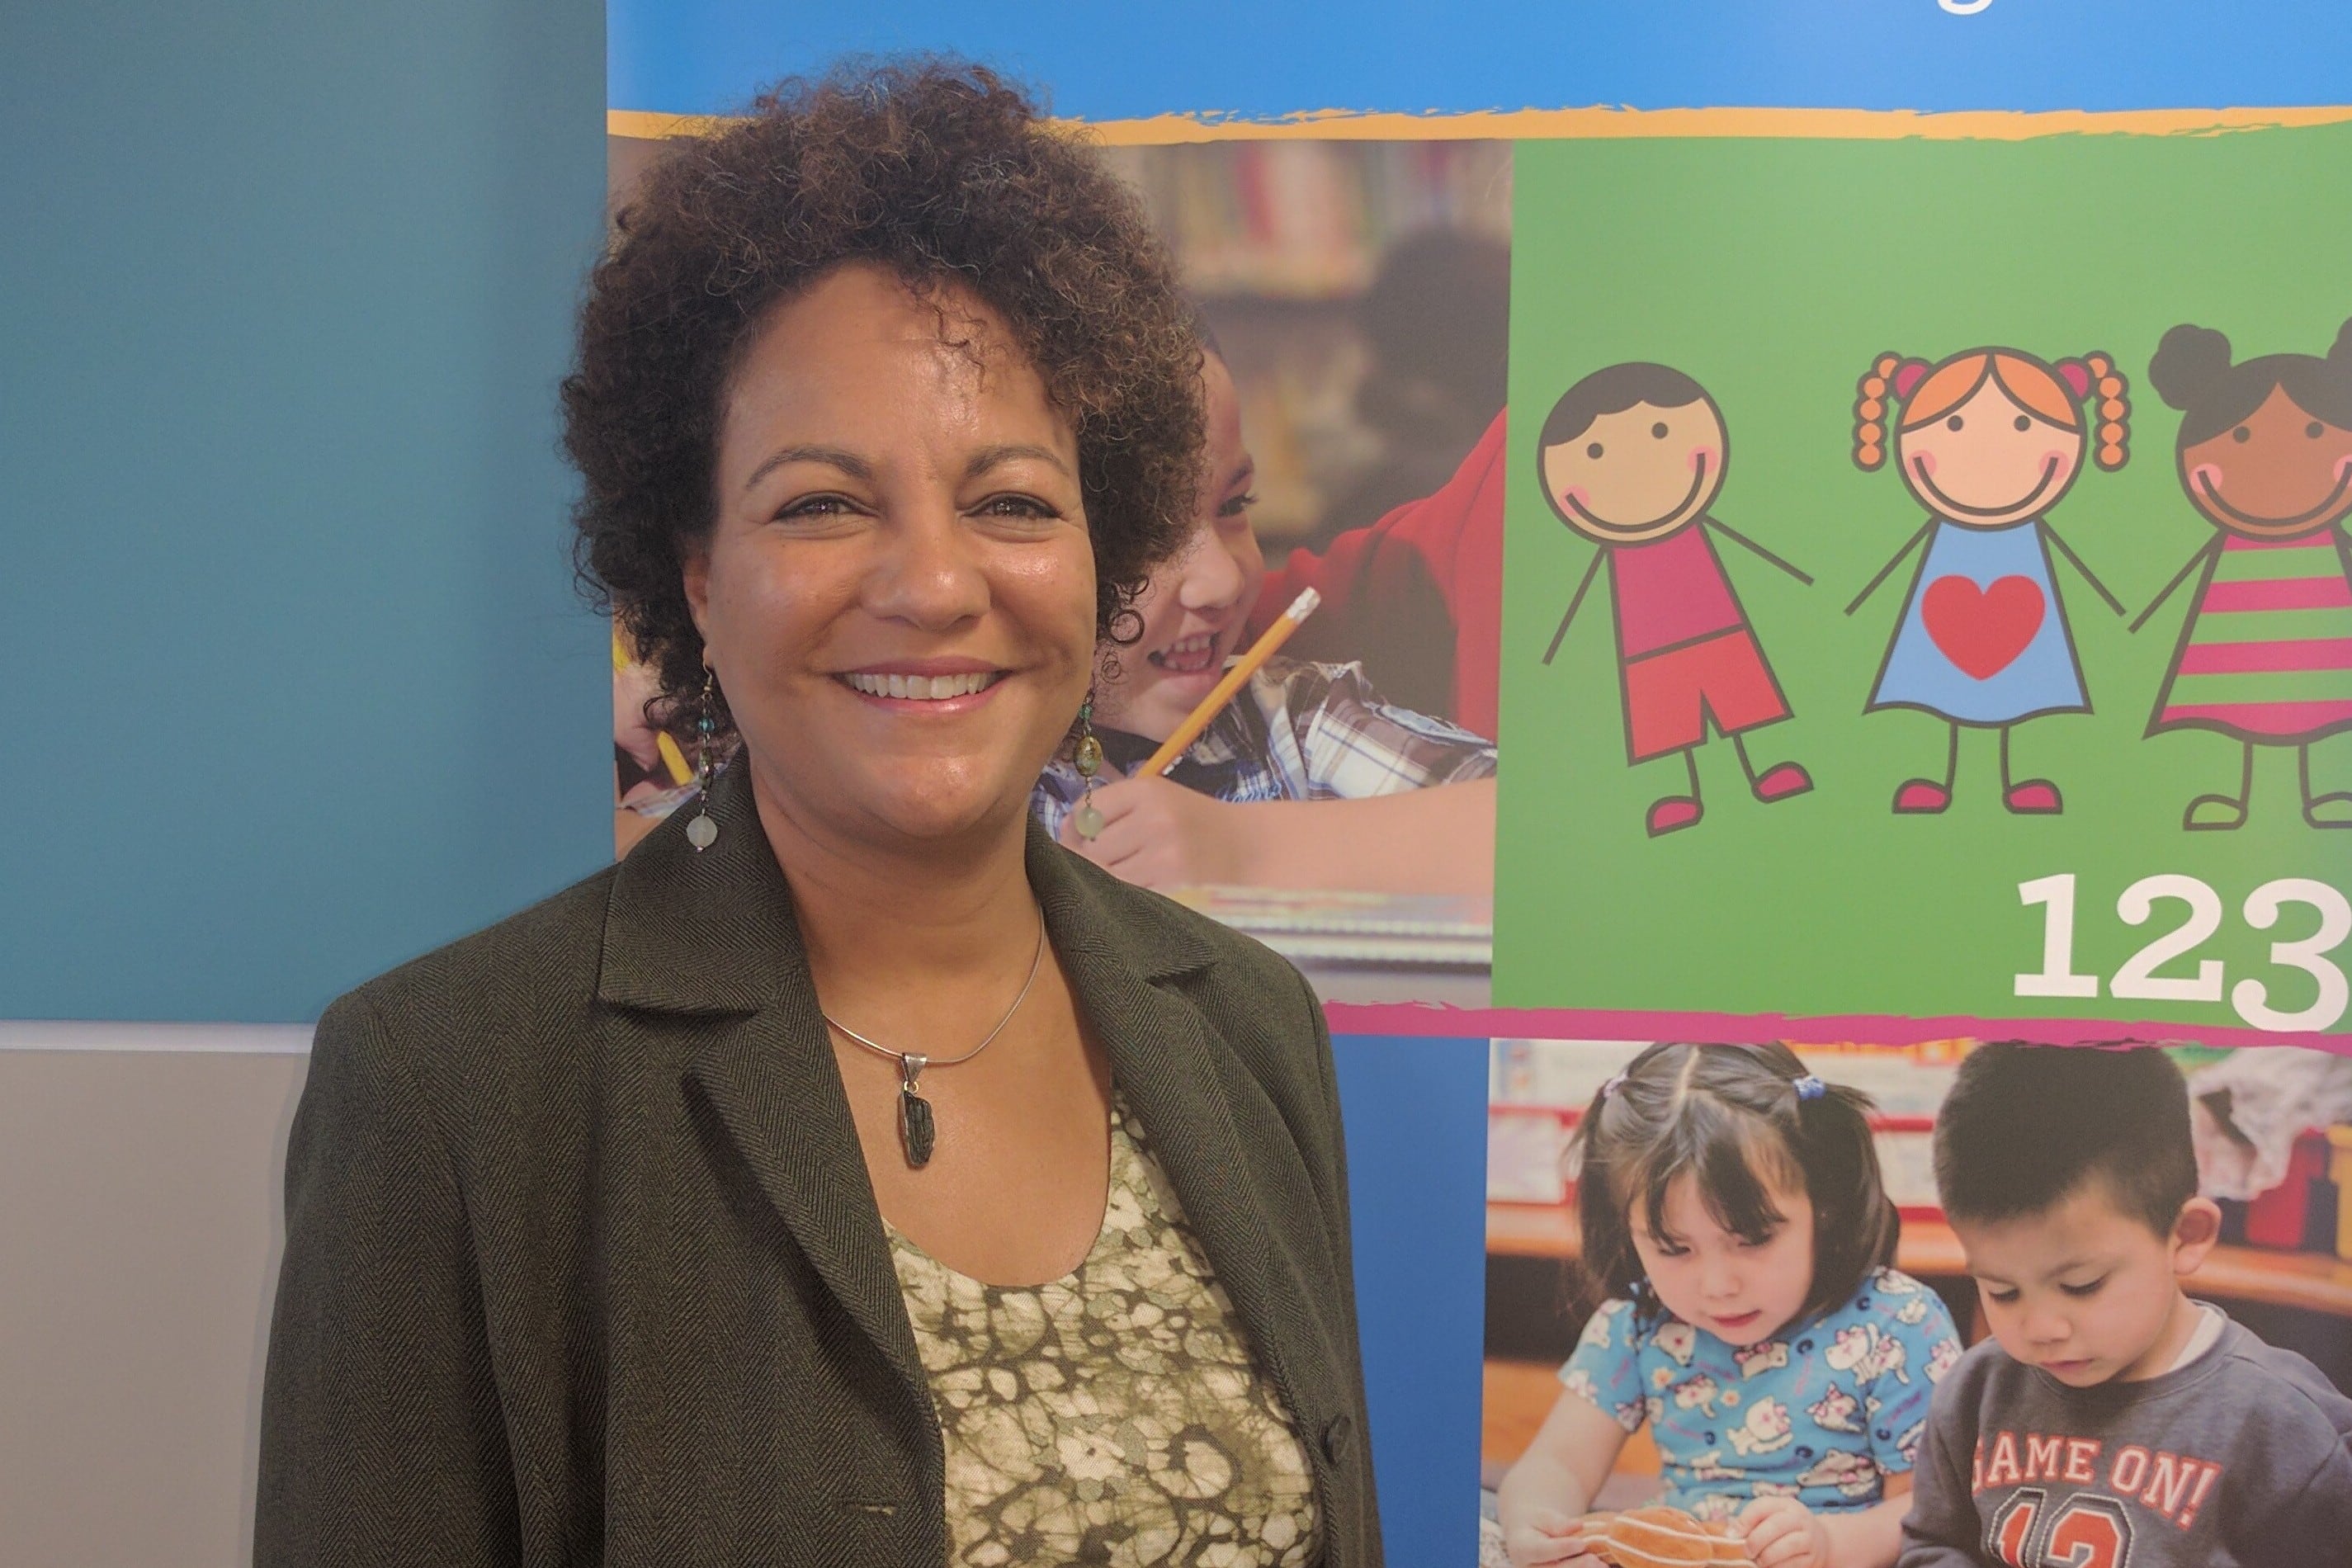 A woman with short brown hair who is wearing a dark blazer and a necklace stands in front of a bulletin board with drawings and photos of children on it.